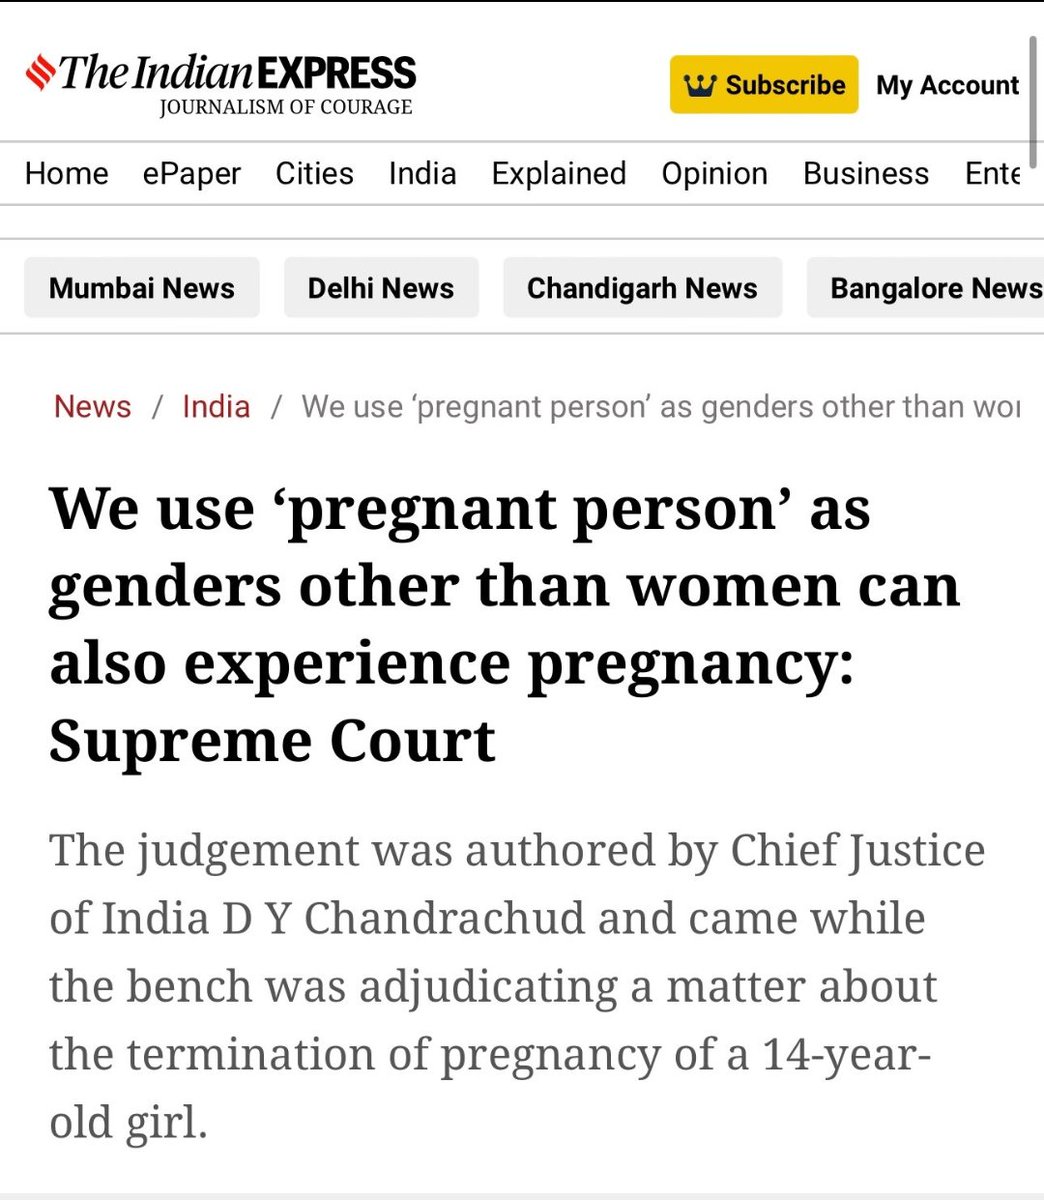 No one except a Biological Woman can get pregnant, but Milords are making false claims and setting a precedent.

Can we say 'We will rip you apart' to the judges for this like they said to Baba Ramdev?